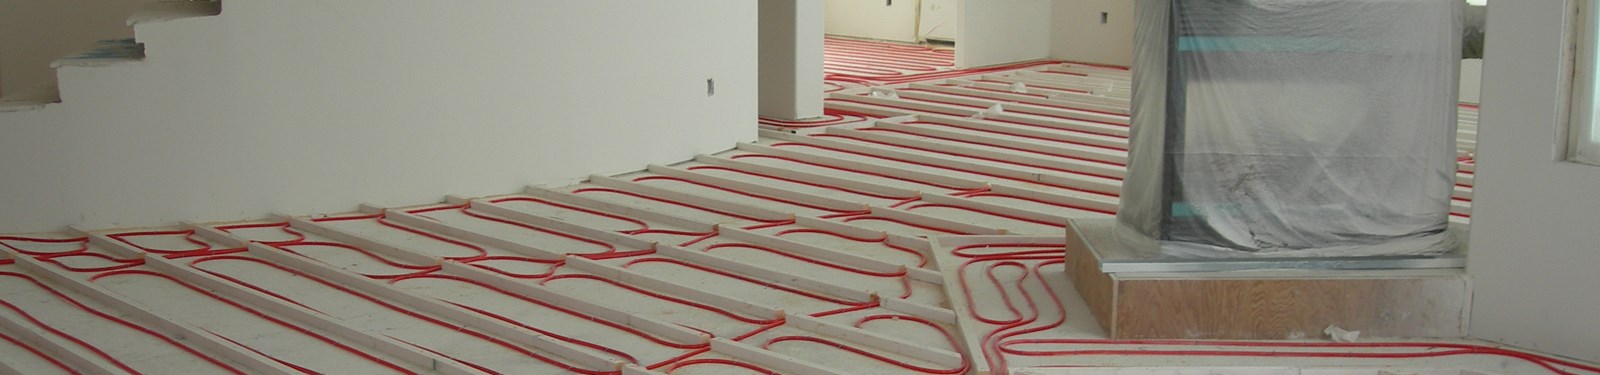 PEX tubing laid between sleeper wood strips prior to a gypsum cement pour